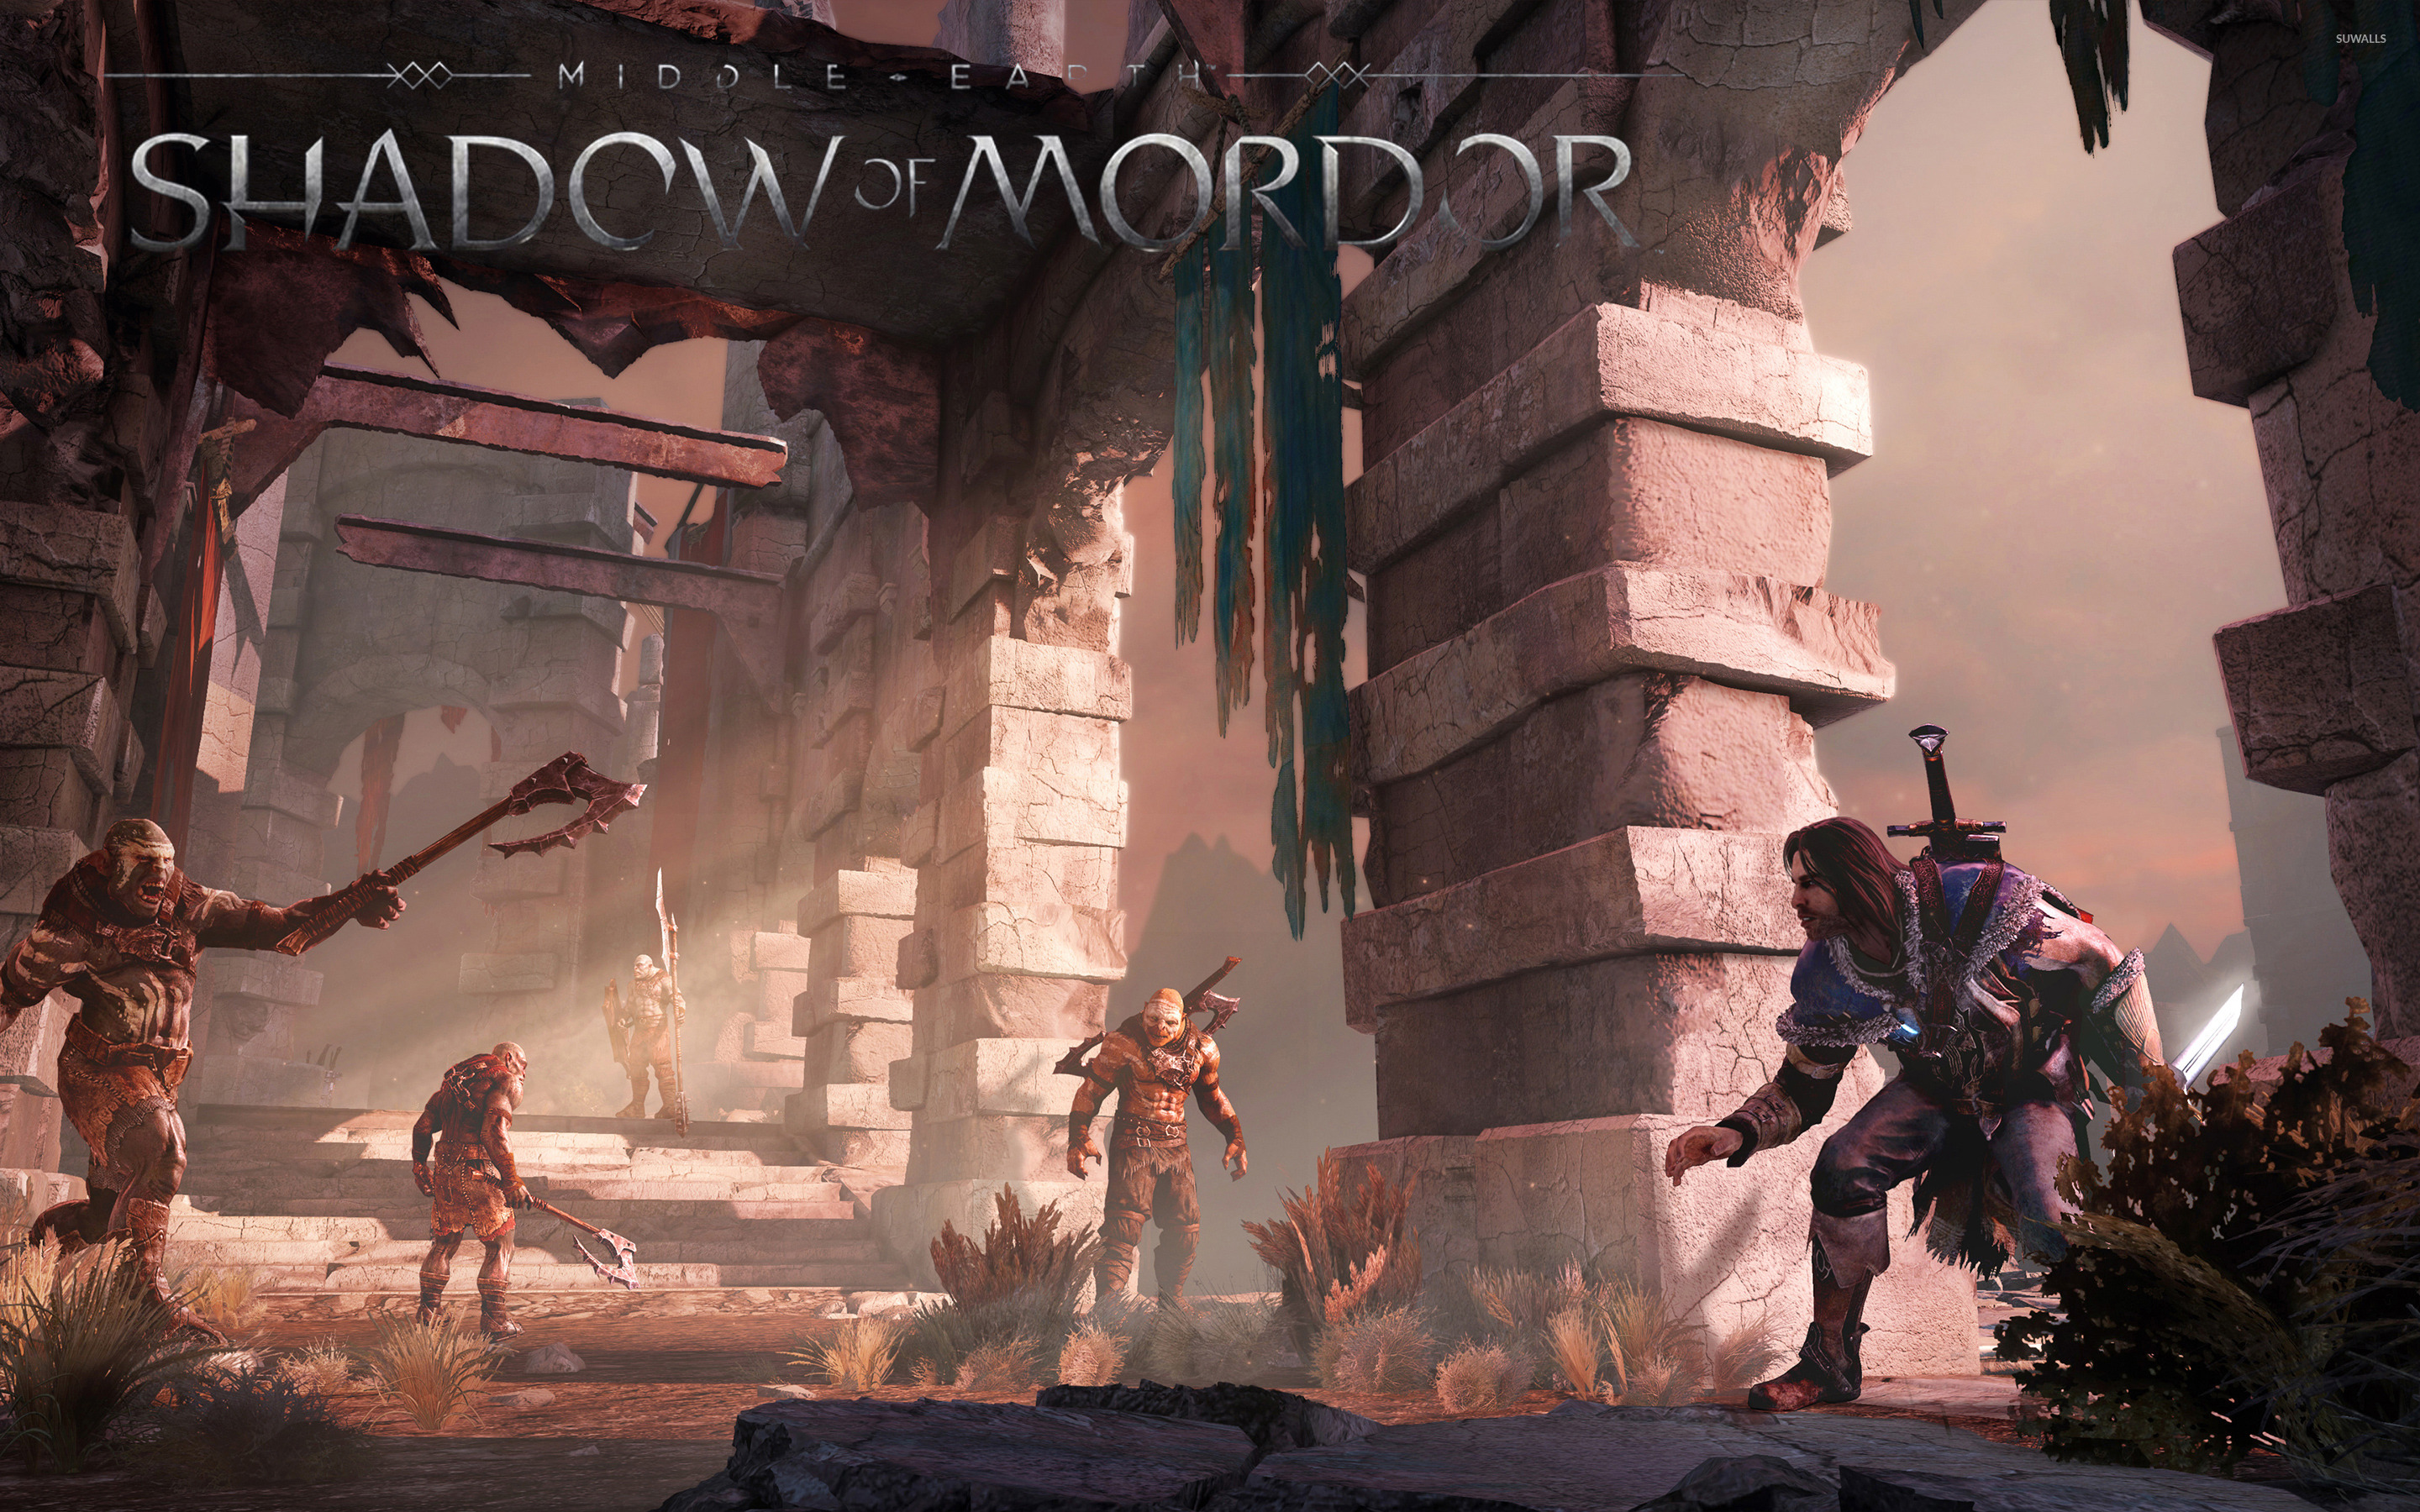 Middle earth Shadow of Mordor [13] wallpaper   Game